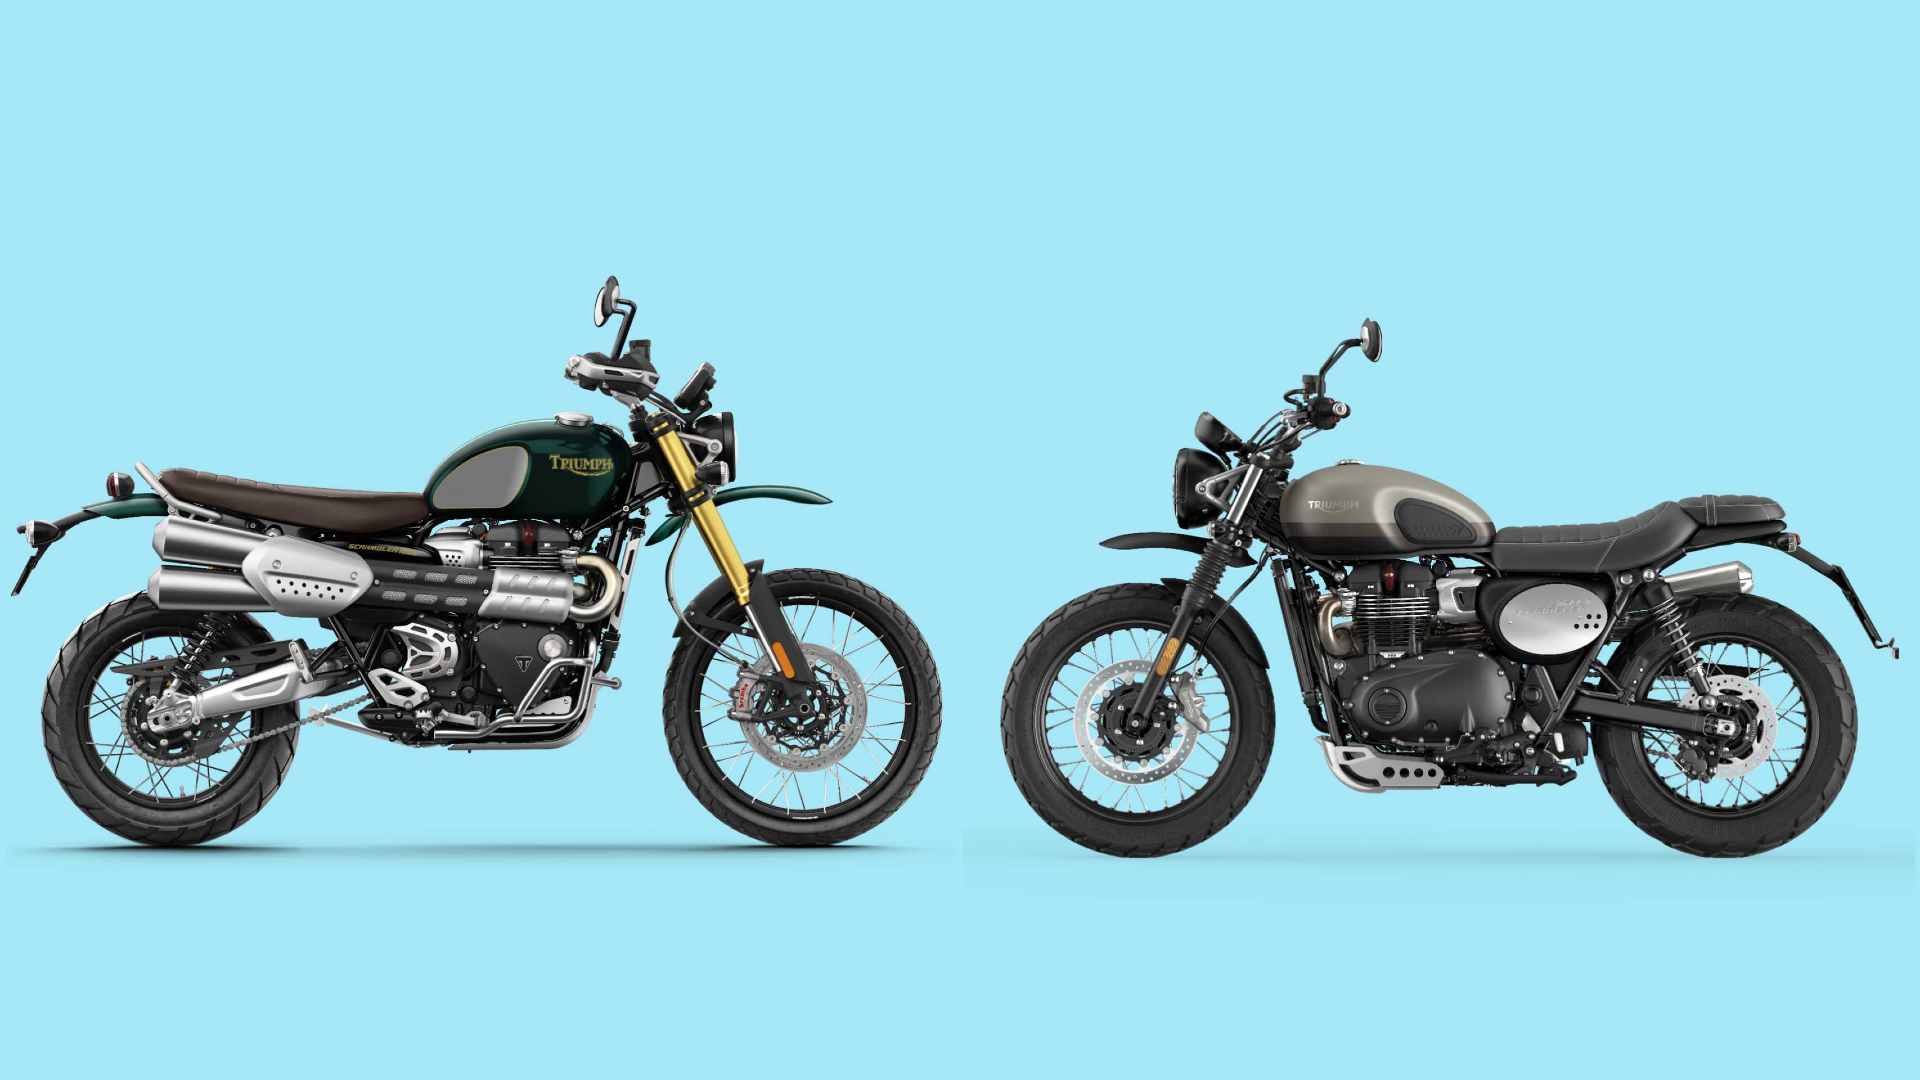 Just 1,000 examples of the Triumph Scrambler 1200 Steve McQueen edition (left) will be produced, and just 775 examples of the Street Scrambler Sandstorm will be built. Image: Triumph Motorcycles/Tech2